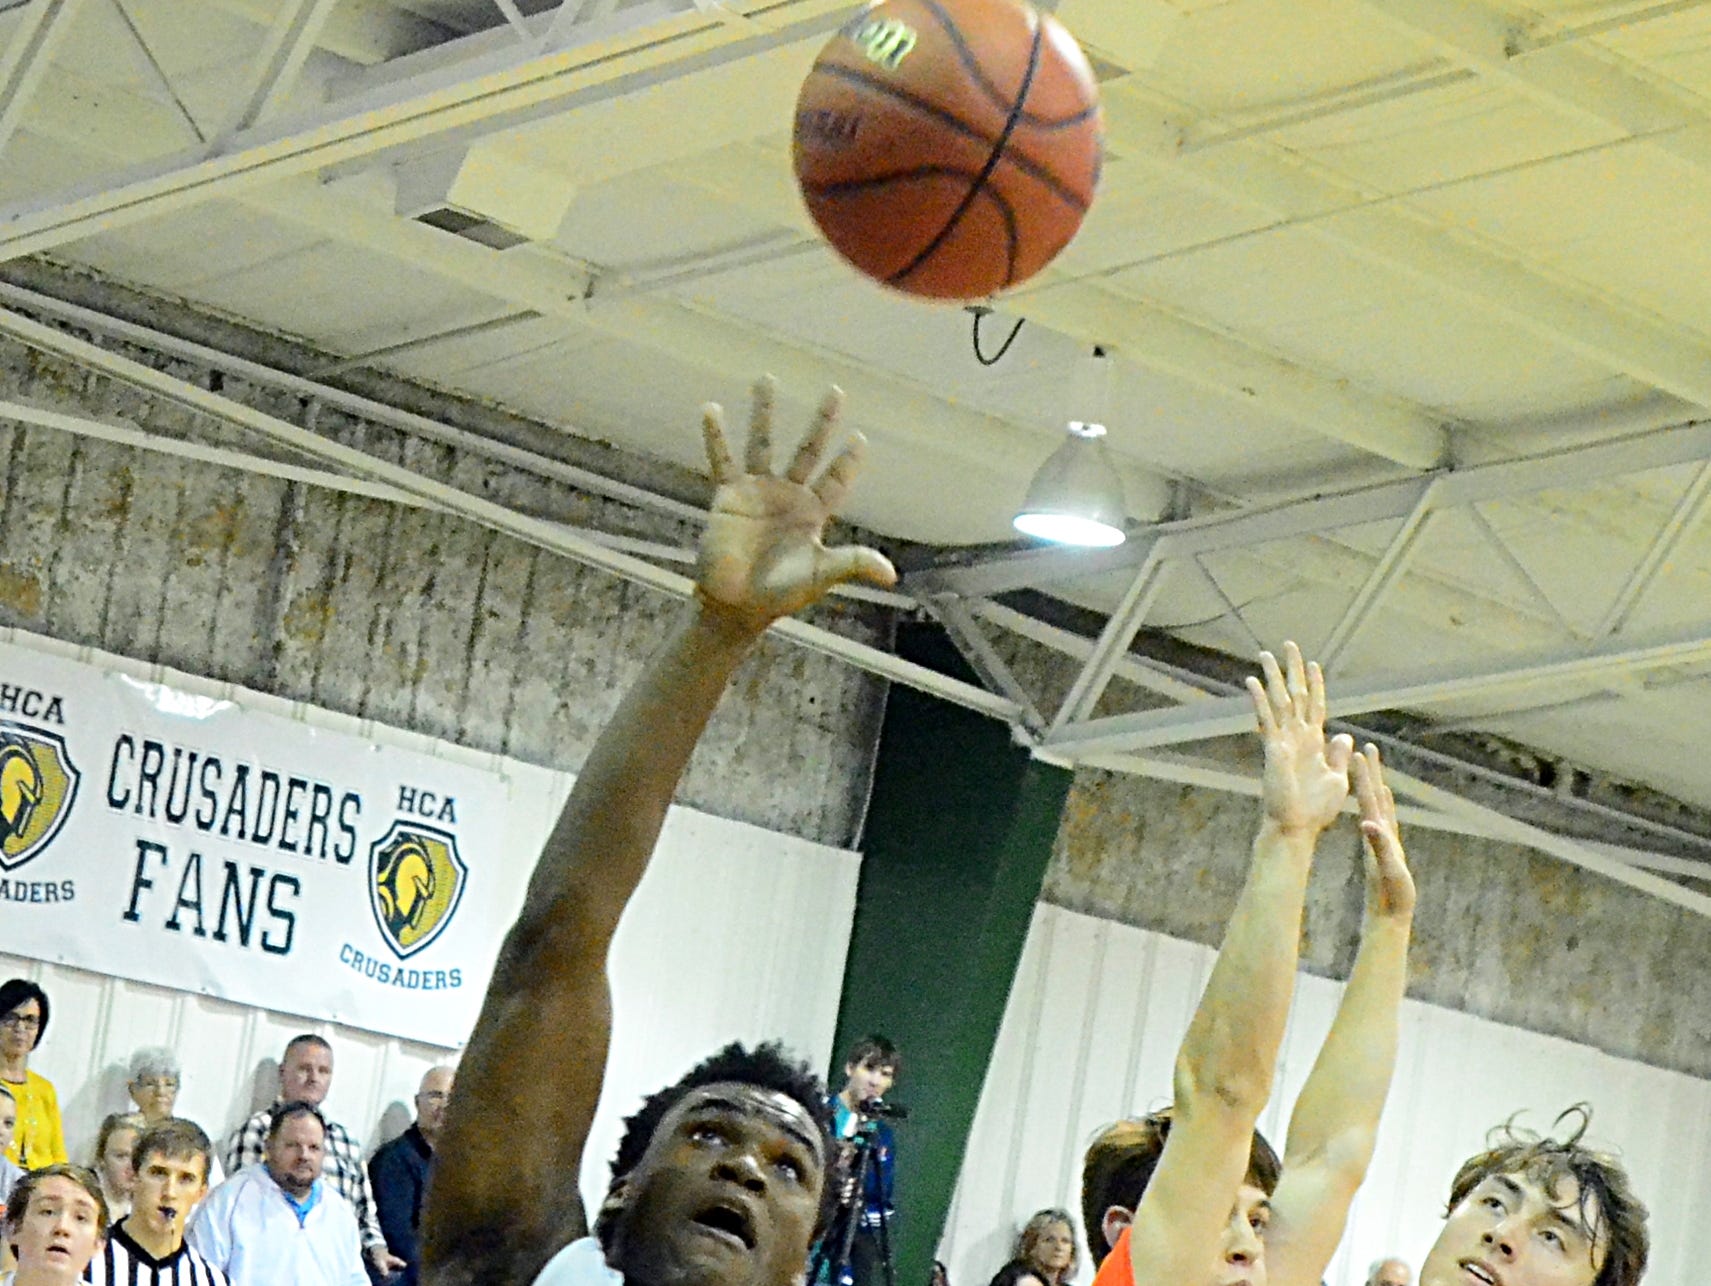 Hendersonville Christian Academy junior Andre Hambrick releases a layin during first-quarter action.